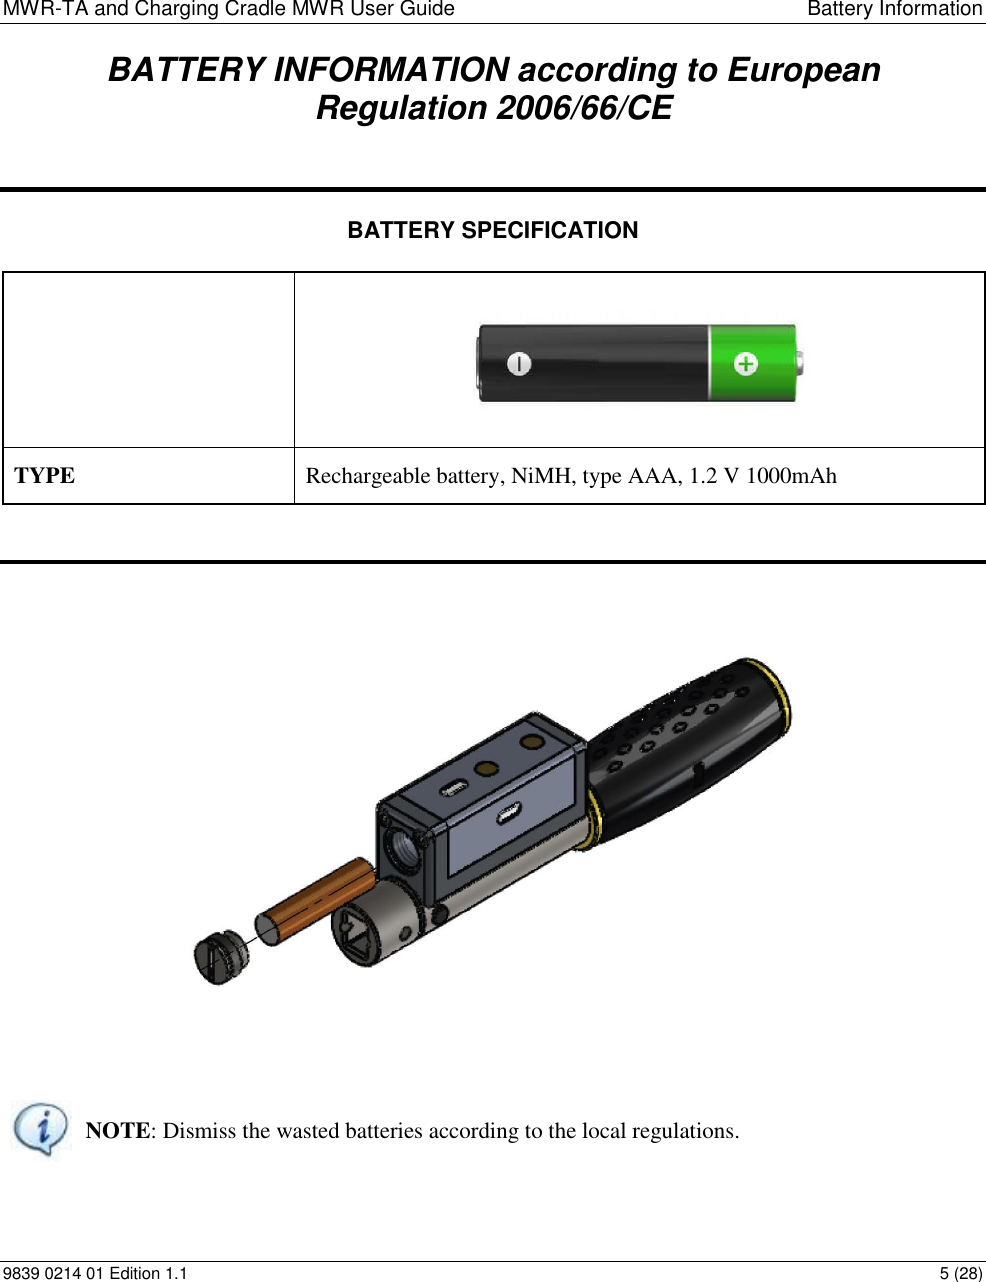 MWR-TA and Charging Cradle MWR User Guide  Battery Information 9839 0214 01 Edition 1.1  5 (28) BATTERY INFORMATION according to European  Regulation 2006/66/CE   BATTERY SPECIFICATION             NOTE: Dismiss the wasted batteries according to the local regulations.     TYPE Rechargeable battery, NiMH, type AAA, 1.2 V 1000mAh 